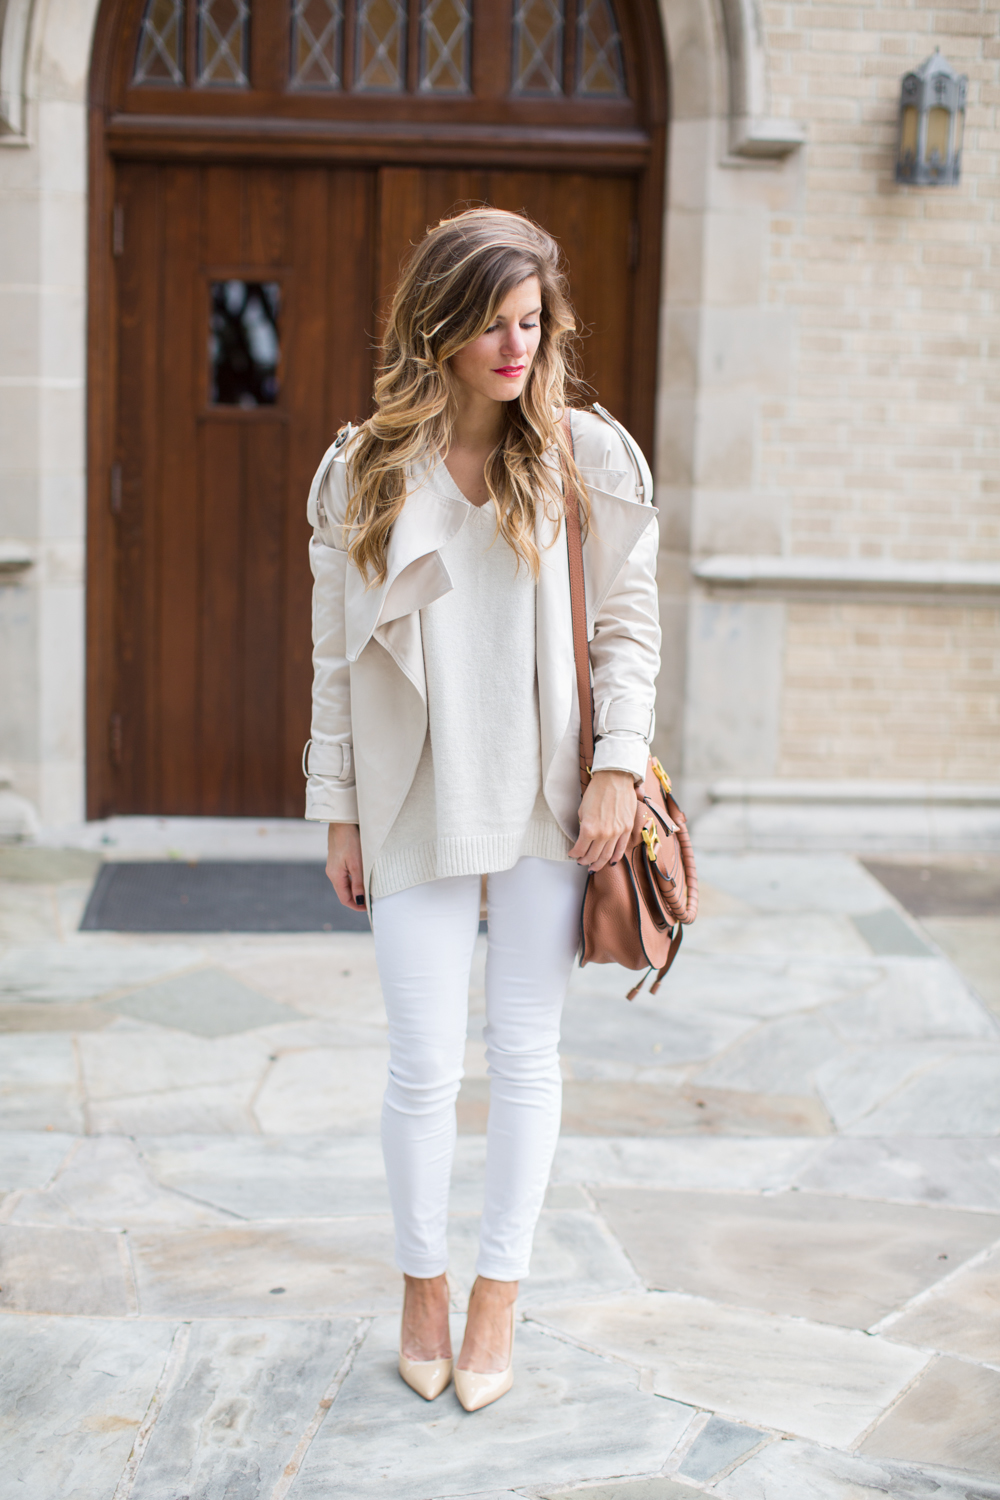 How to wear: Winter White Jeans (Blue is in Fashion this Year)